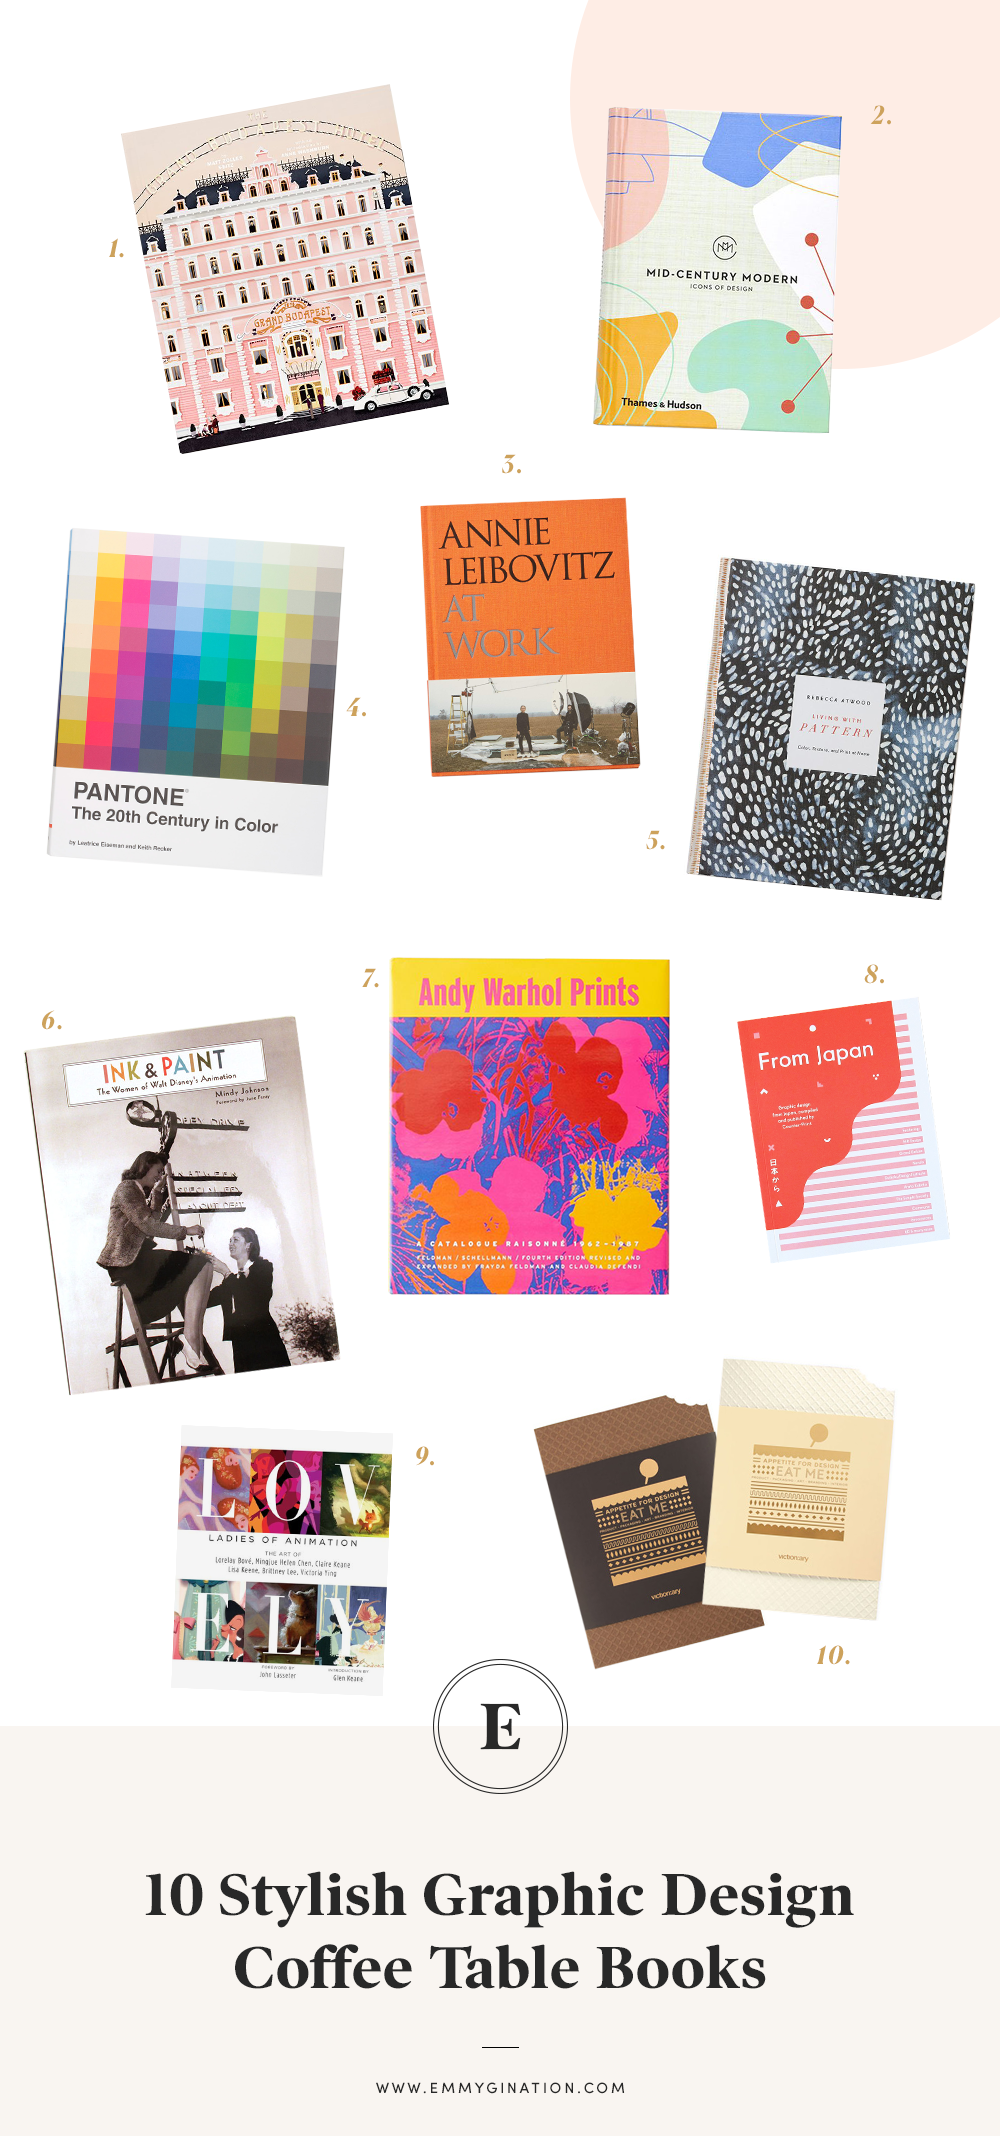 Most Inspiring Coffee Table Books for Designers - Creative Market Blog